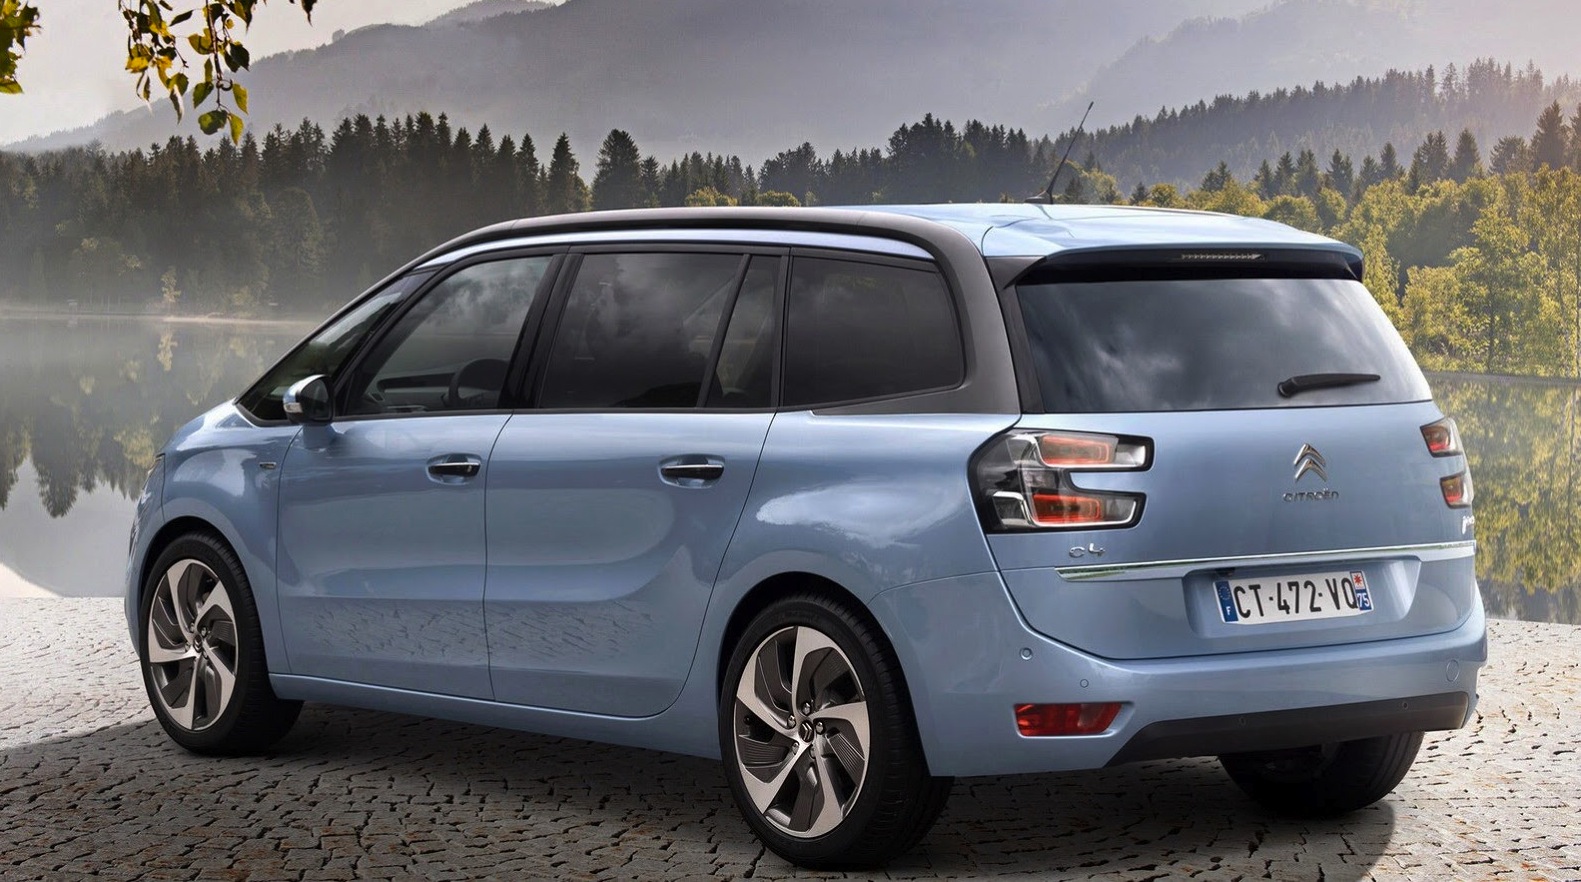 Citroen C4 Grand Picasso French seven seater revealed photos CarAdvice